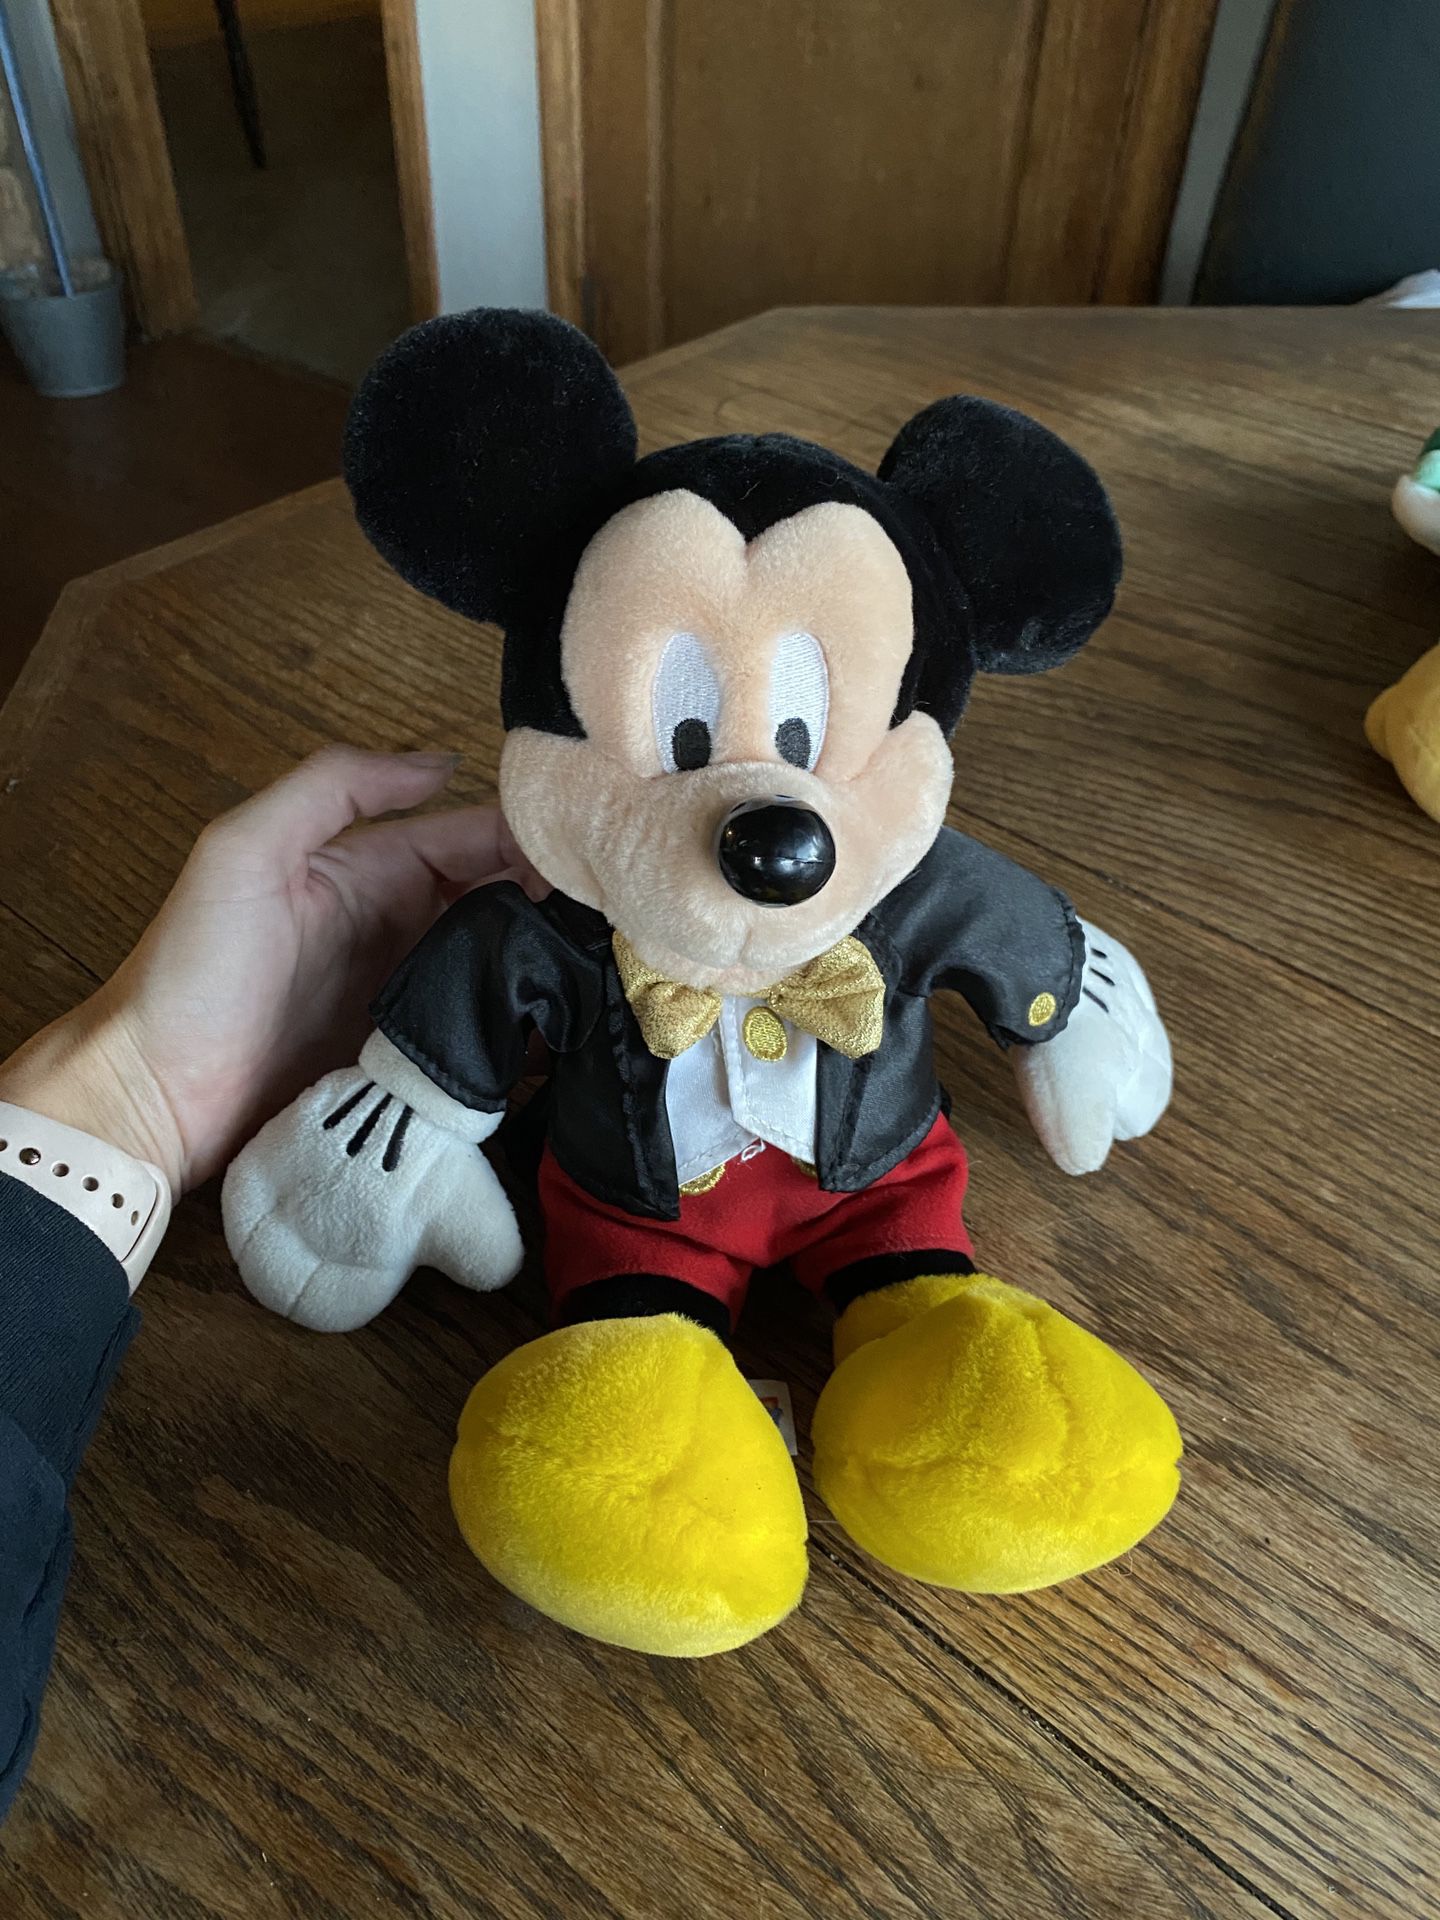 Special Addition Talking Micky Mouse stuffed animal from Disney